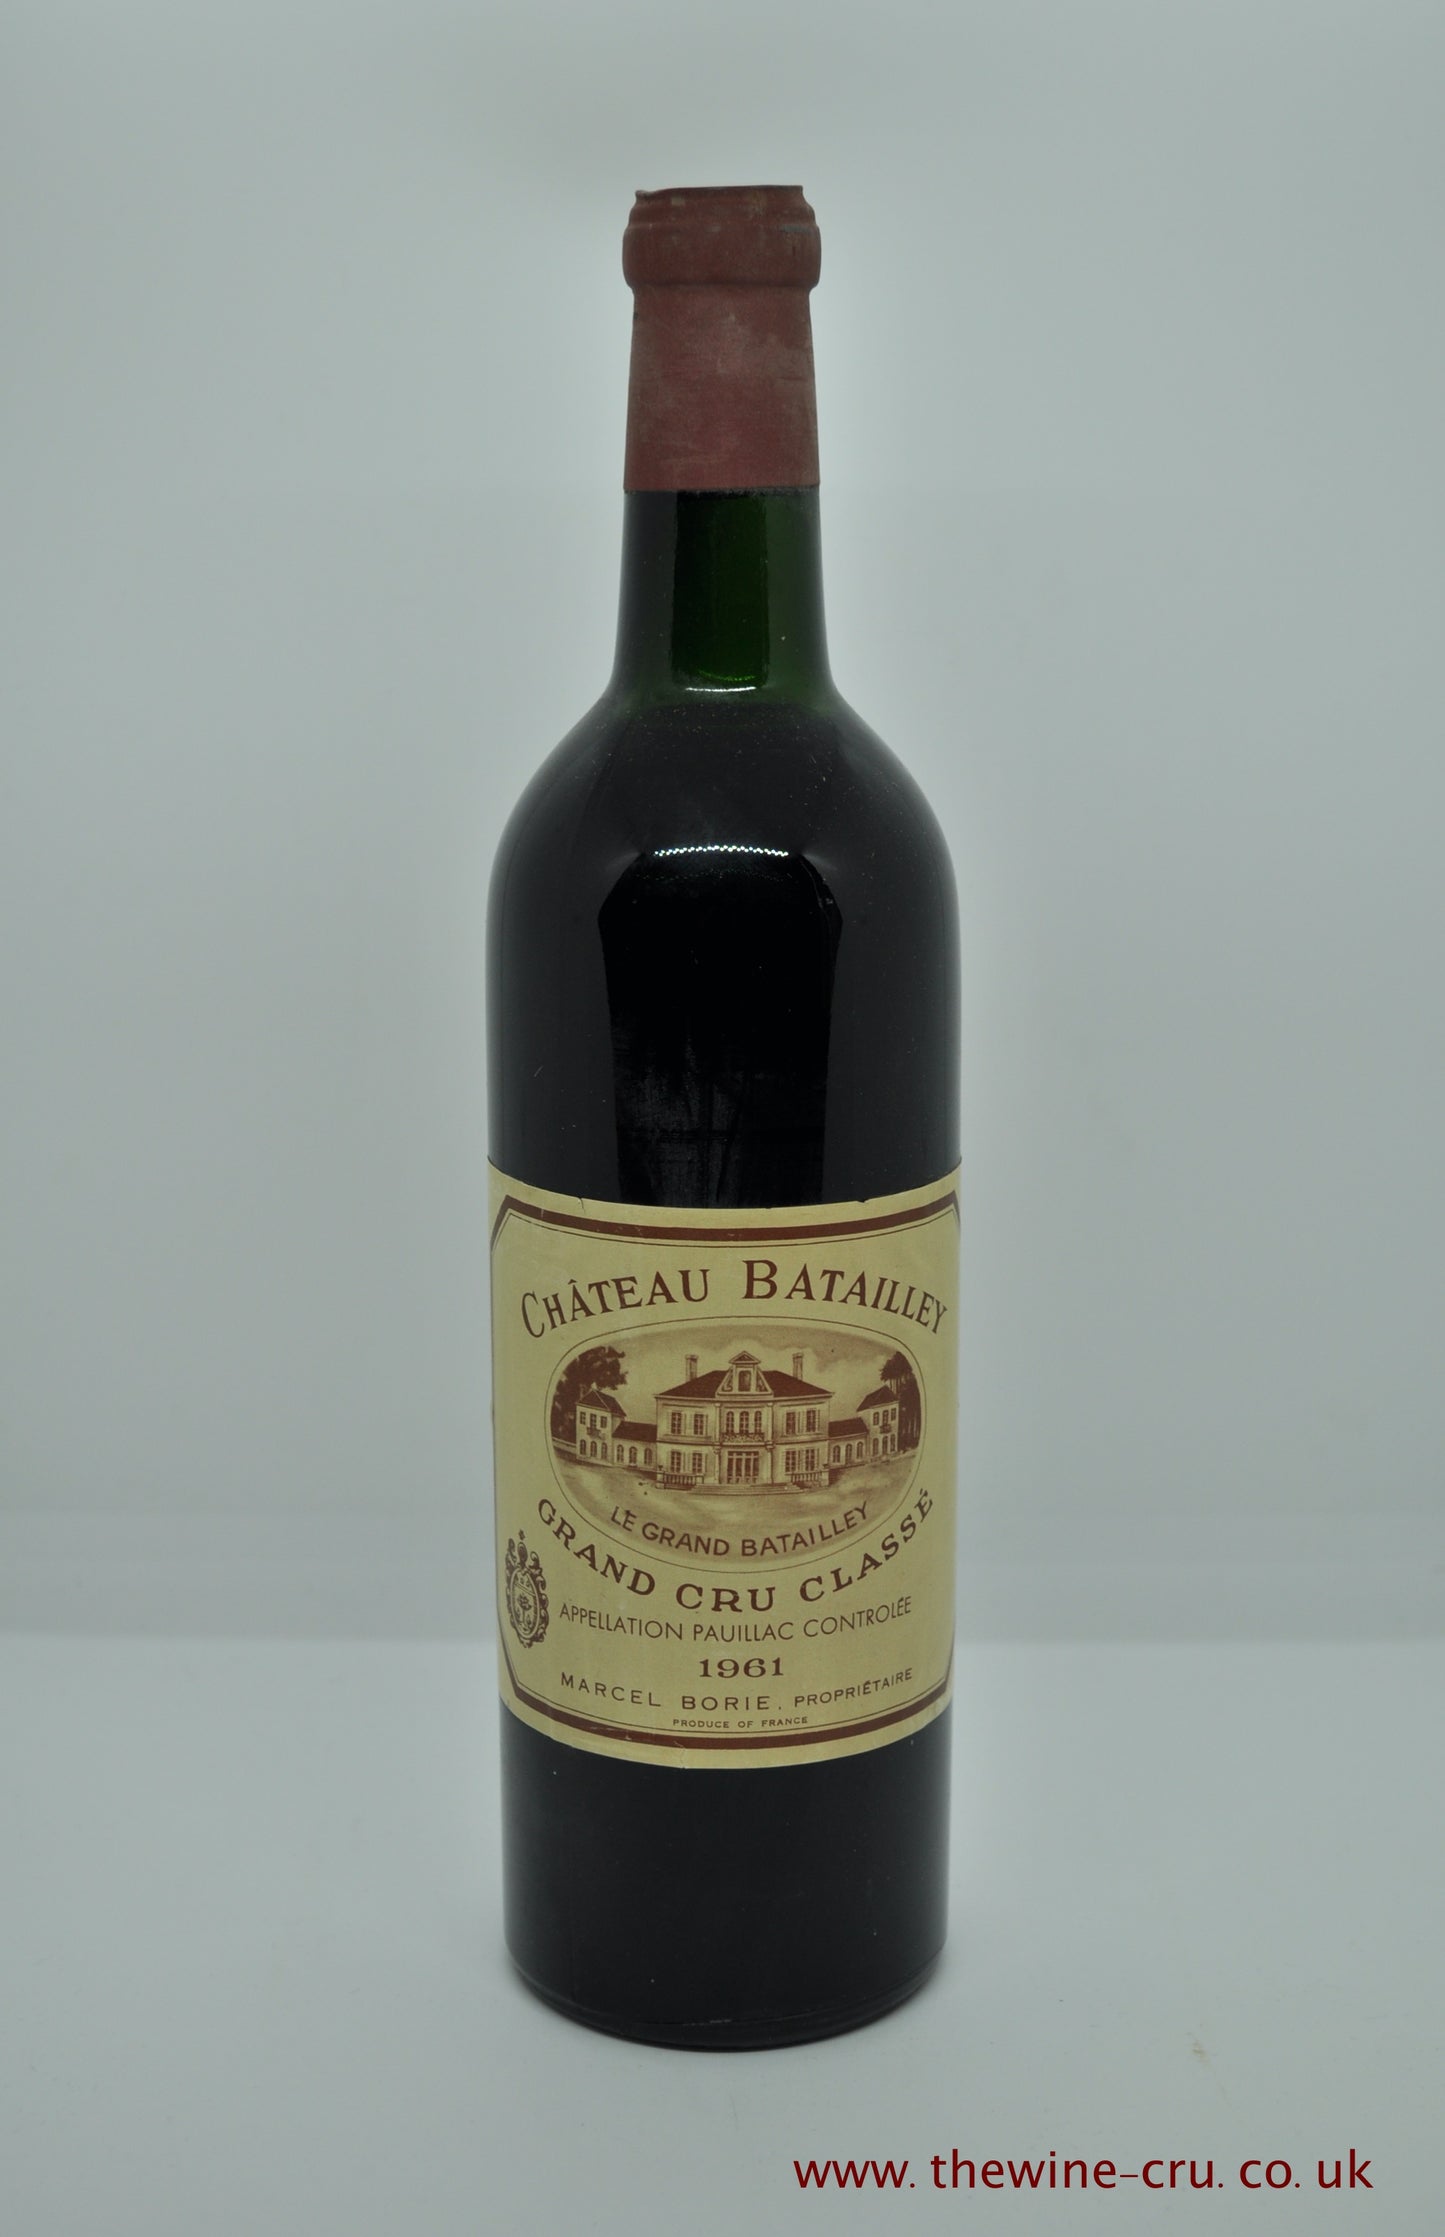 A bottle of 1961 vintage red wine from Chateau Batailley, Bordeaux, France. The bottle is in very good condition, with the wine level at top shoulder. Available for immediate delivery, free local delivery and gift wrapping.